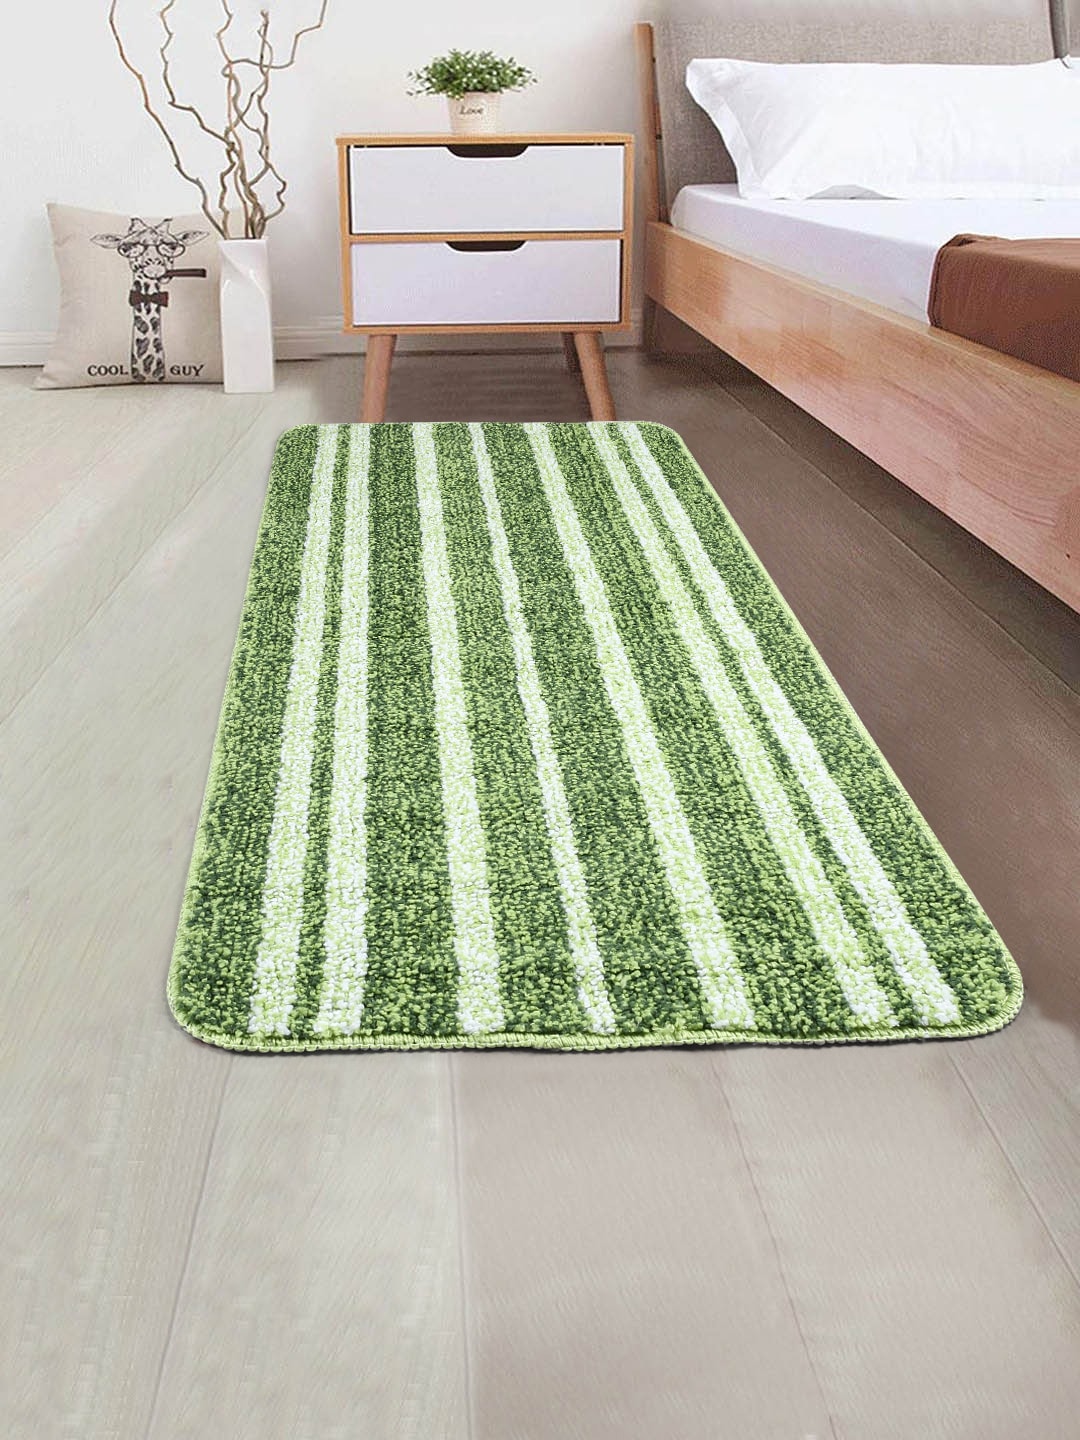 Saral Home Green Striped Anti-Skid Floor Runner Price in India